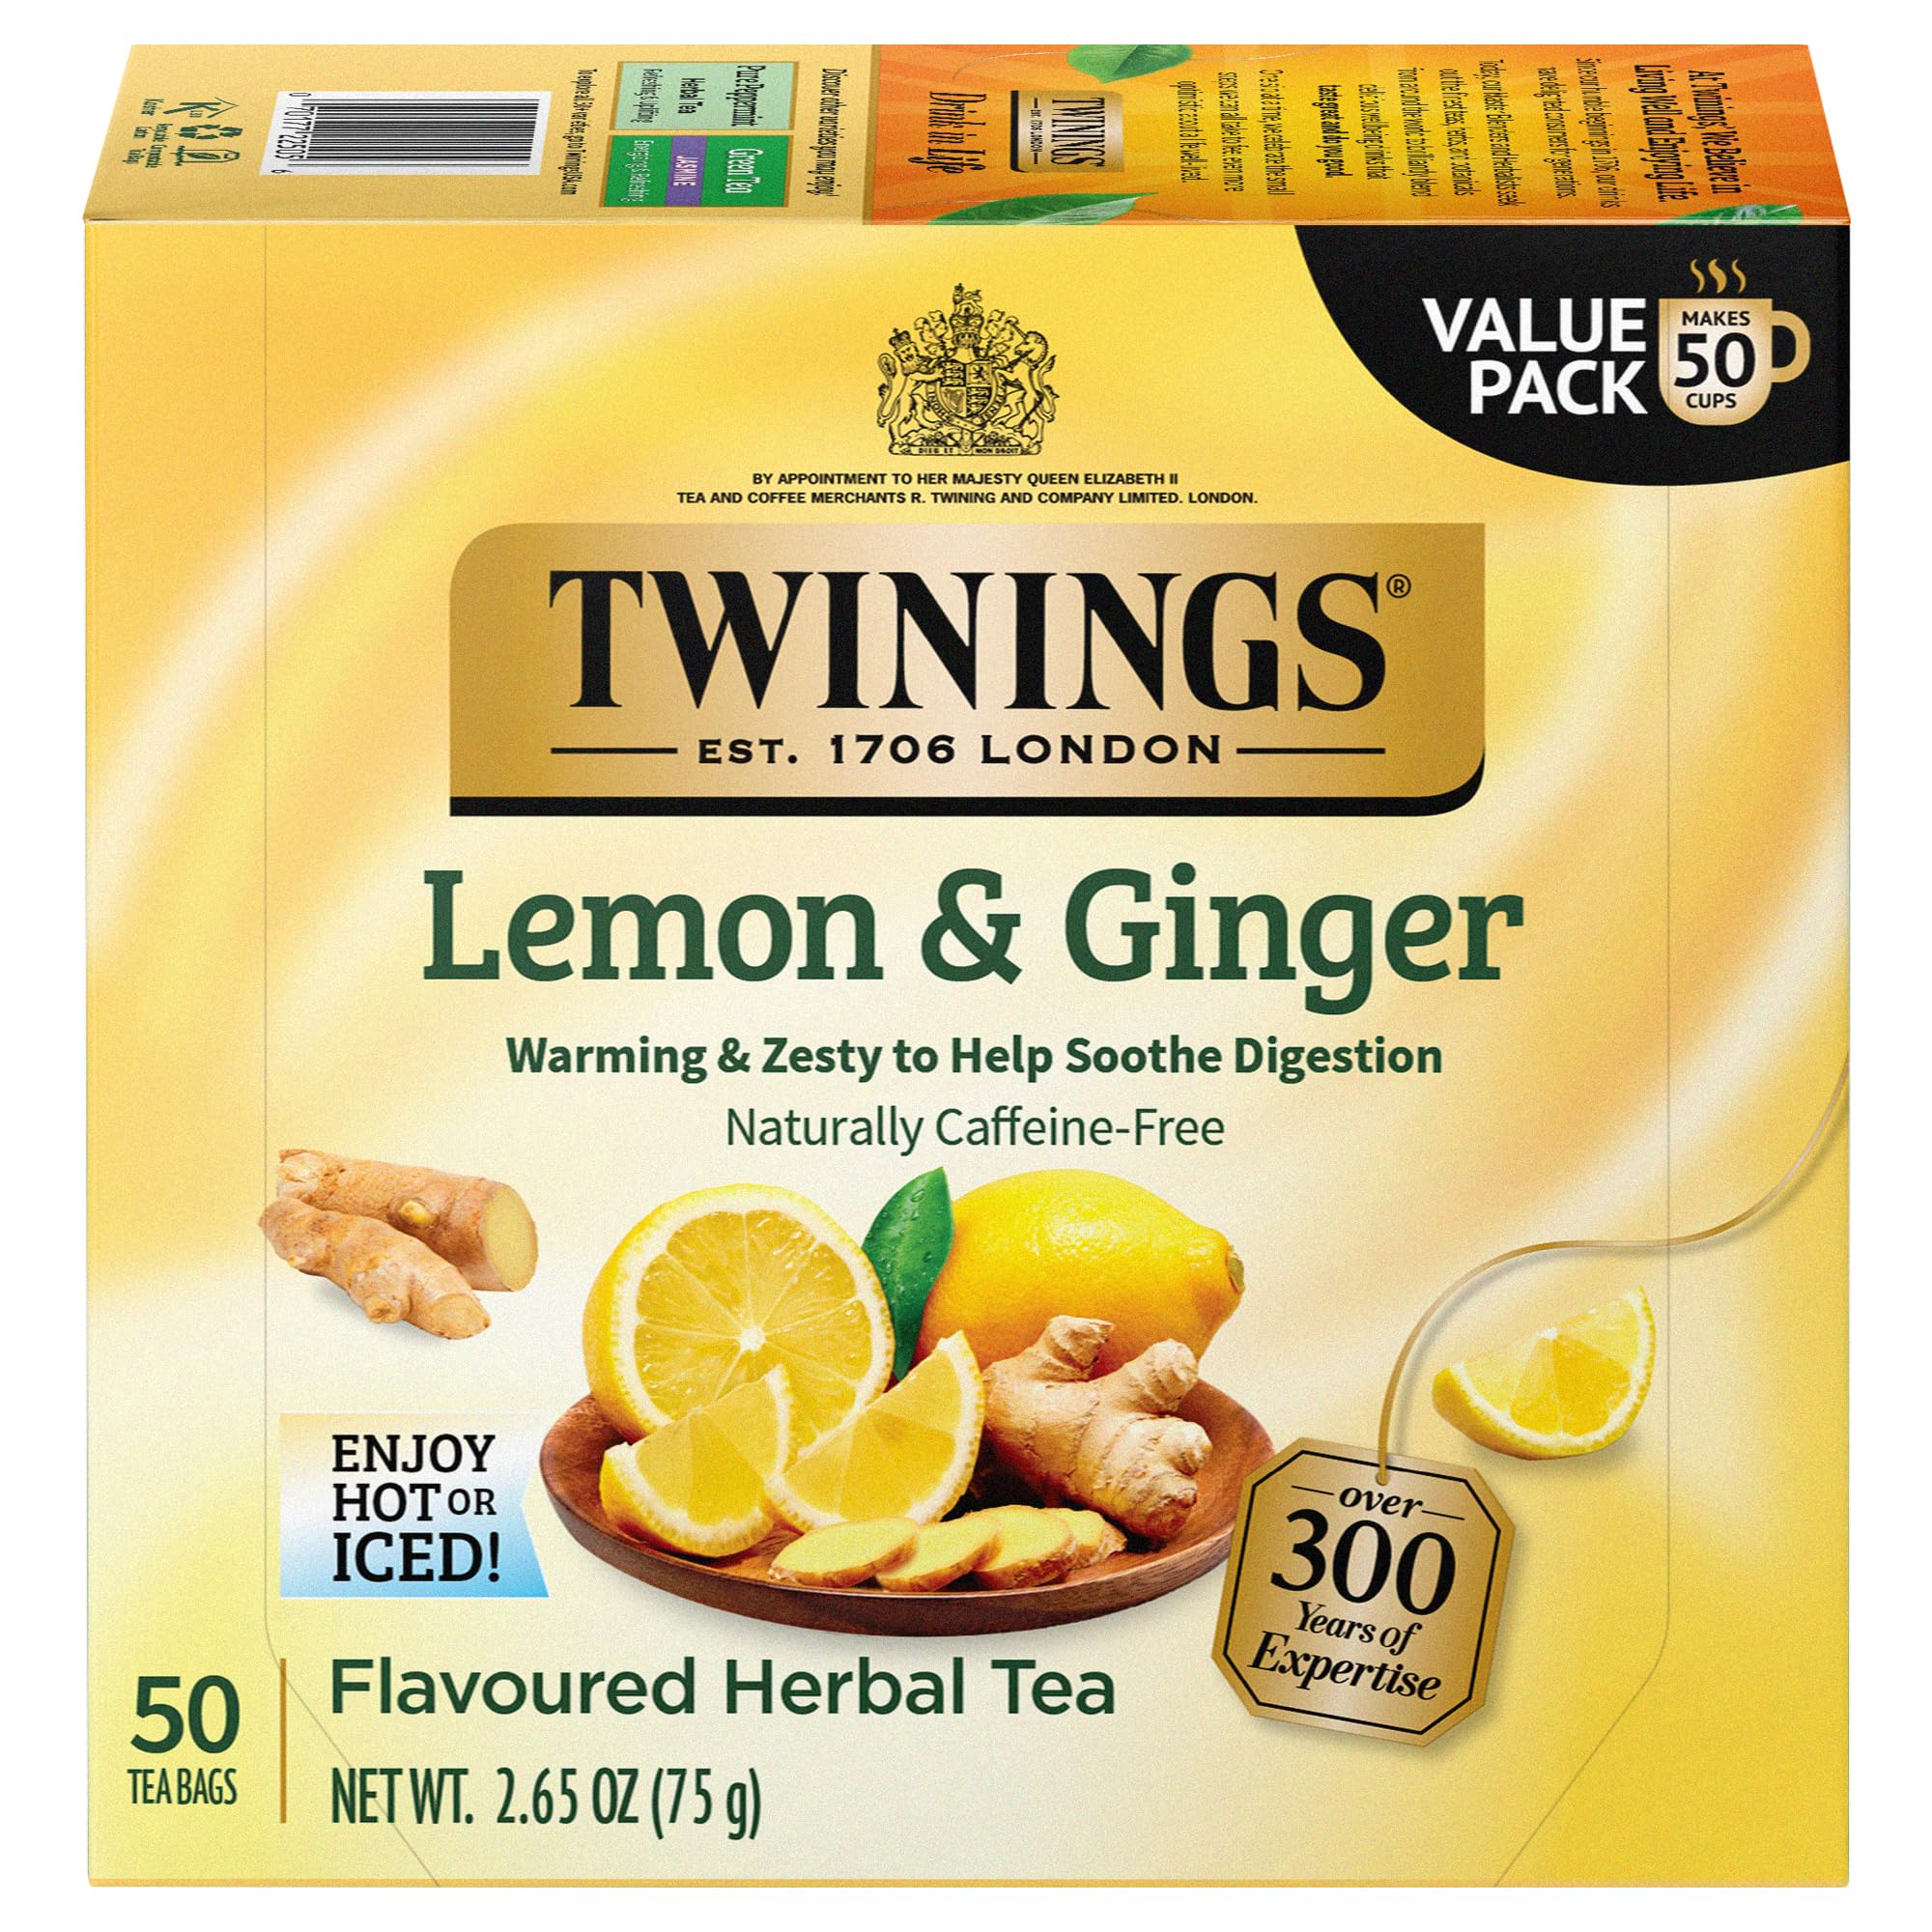 Twinings Lemon & Ginger Herbal Tea, 50 Count (Pack of 6), Individually Wrapped Bags, Tangy Lemon & Spicy Ginger, Decaffeinated, Enjoy Hot or Iced